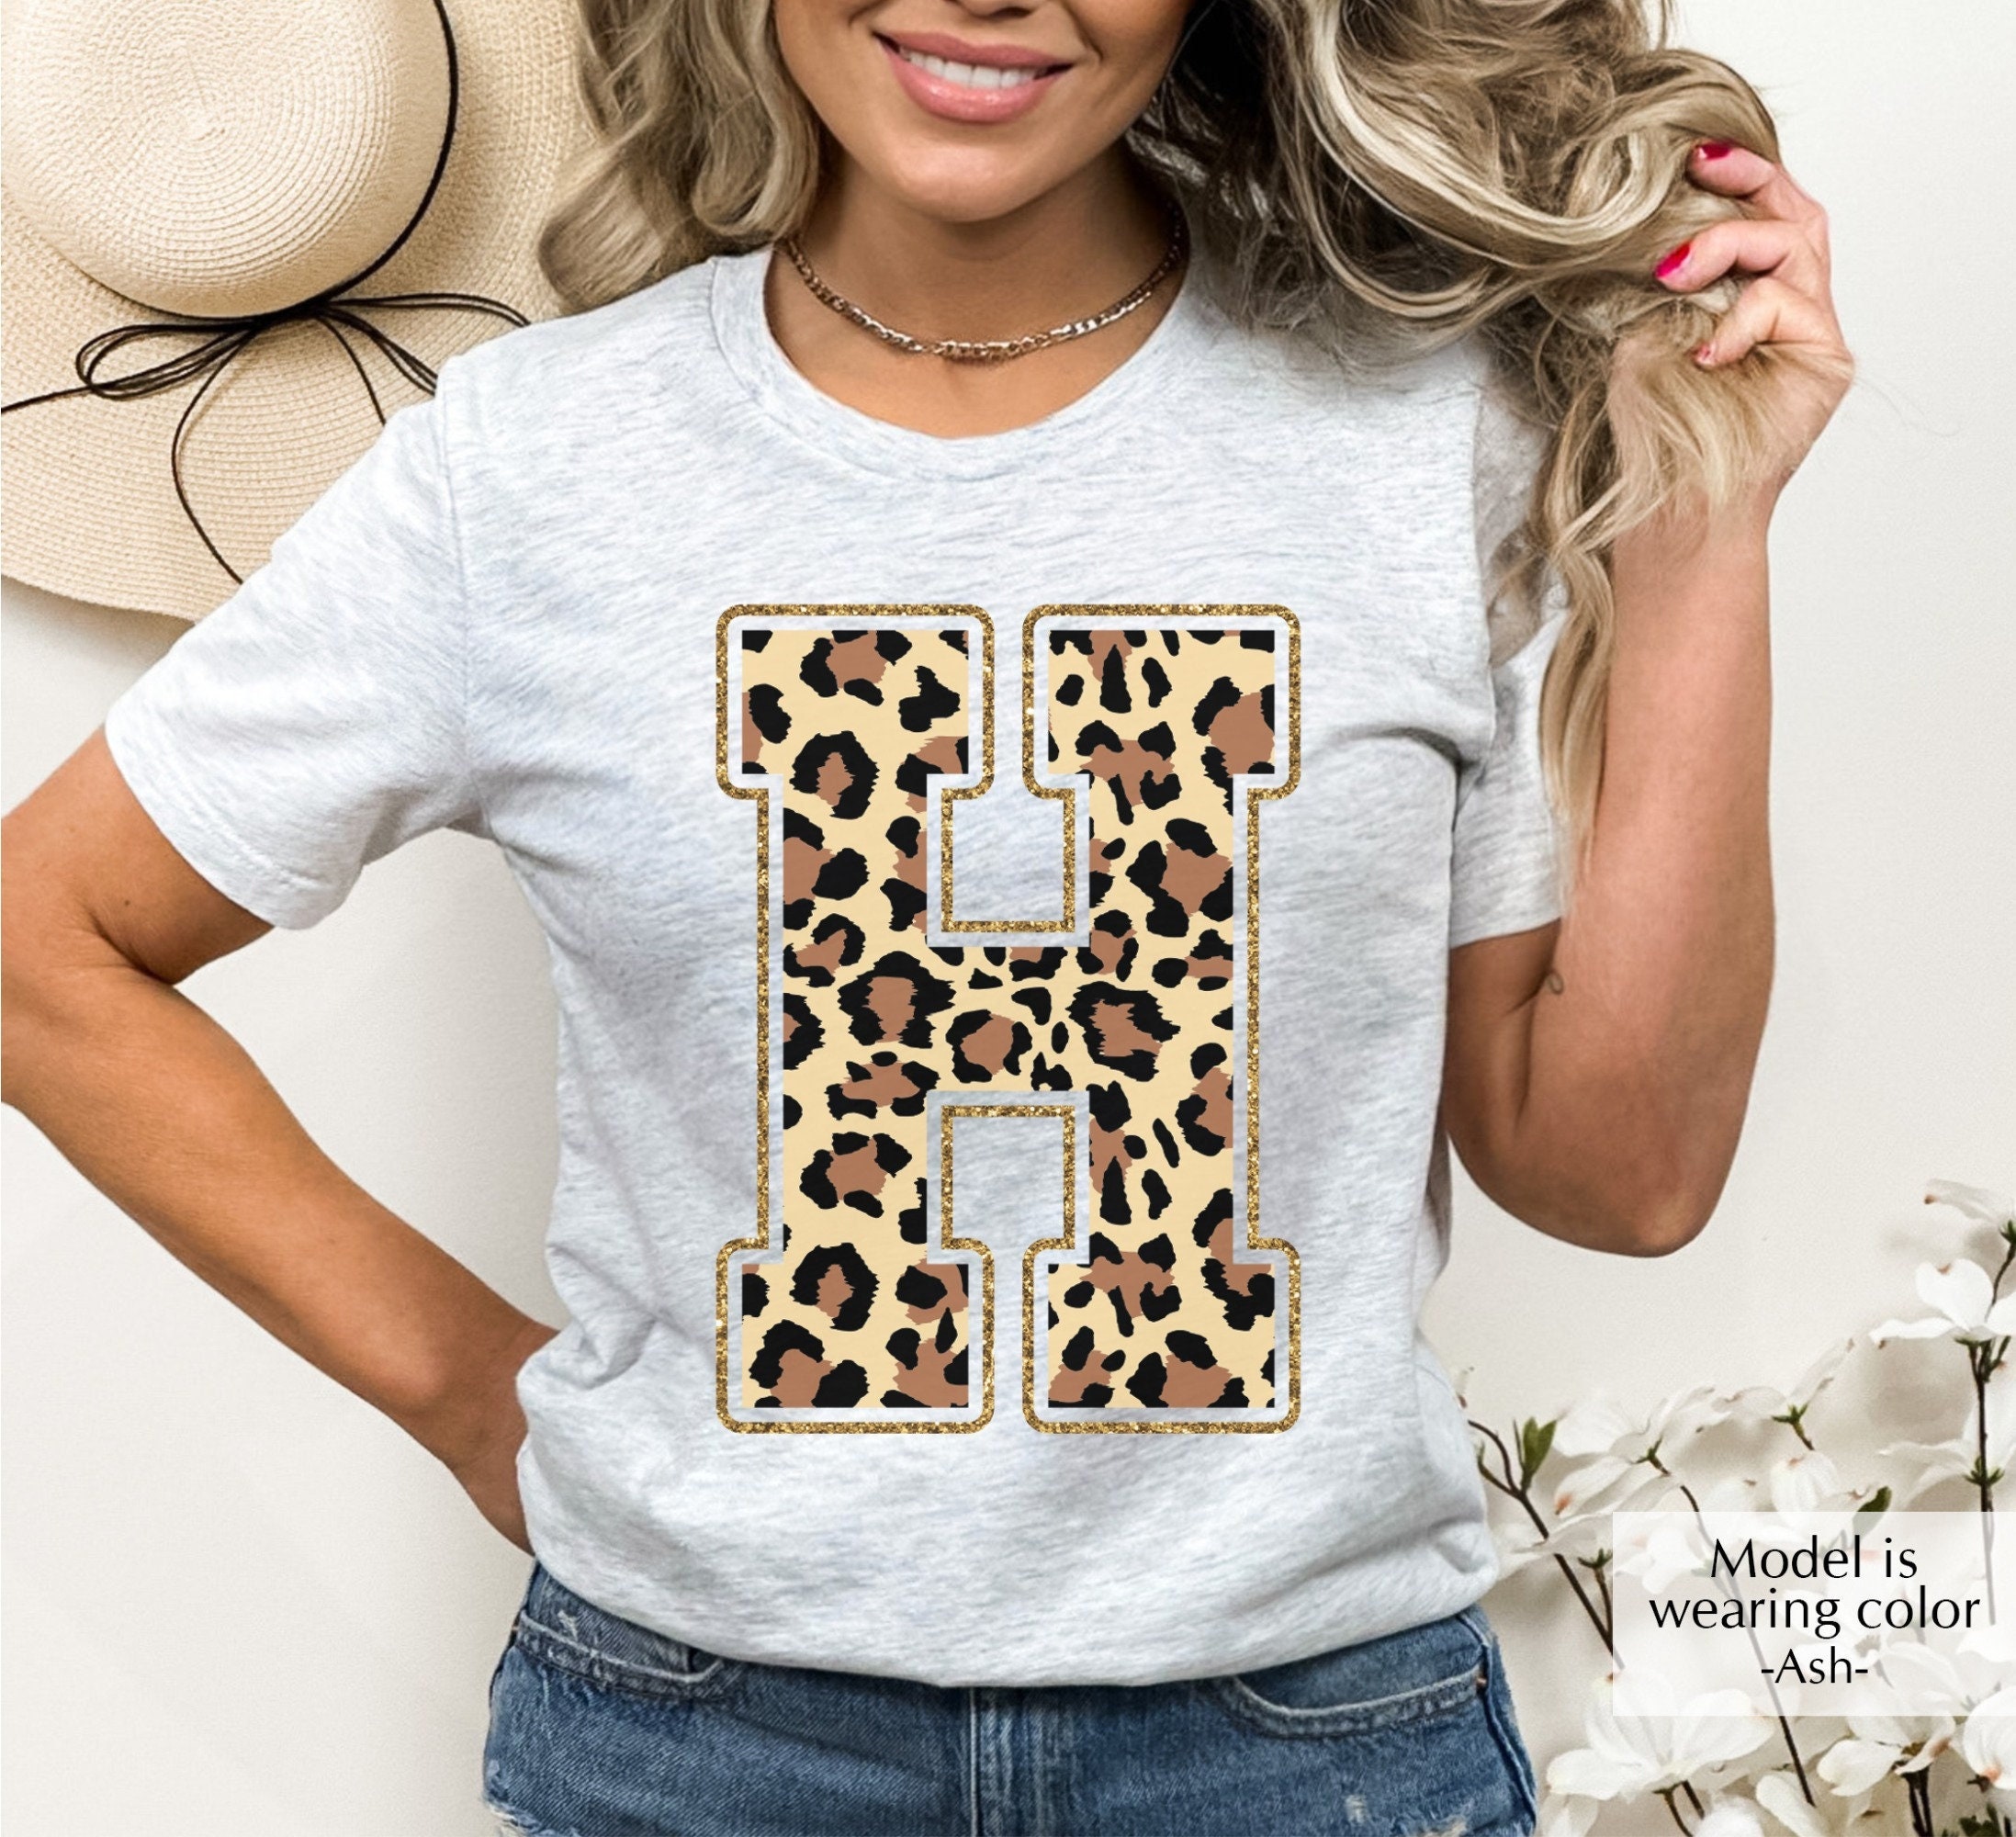 Men Letter Graphic Leopard Printed Tee Shirt Summer Casual Short